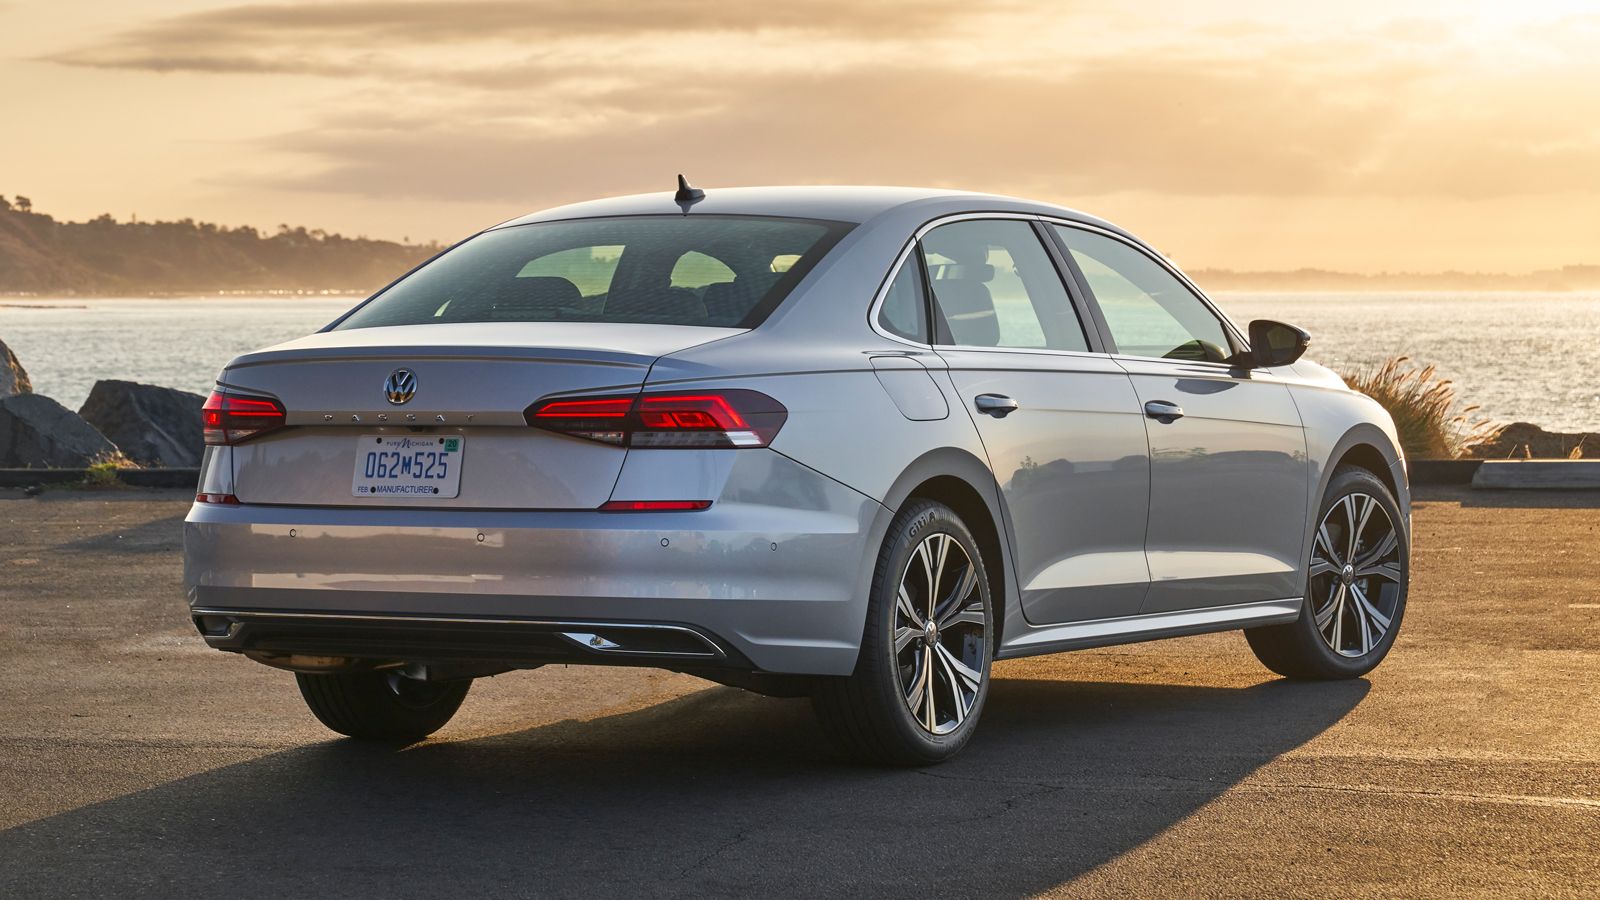 Review: The Improved 2020 Volkswagen Passat Is a Missed Opportunity